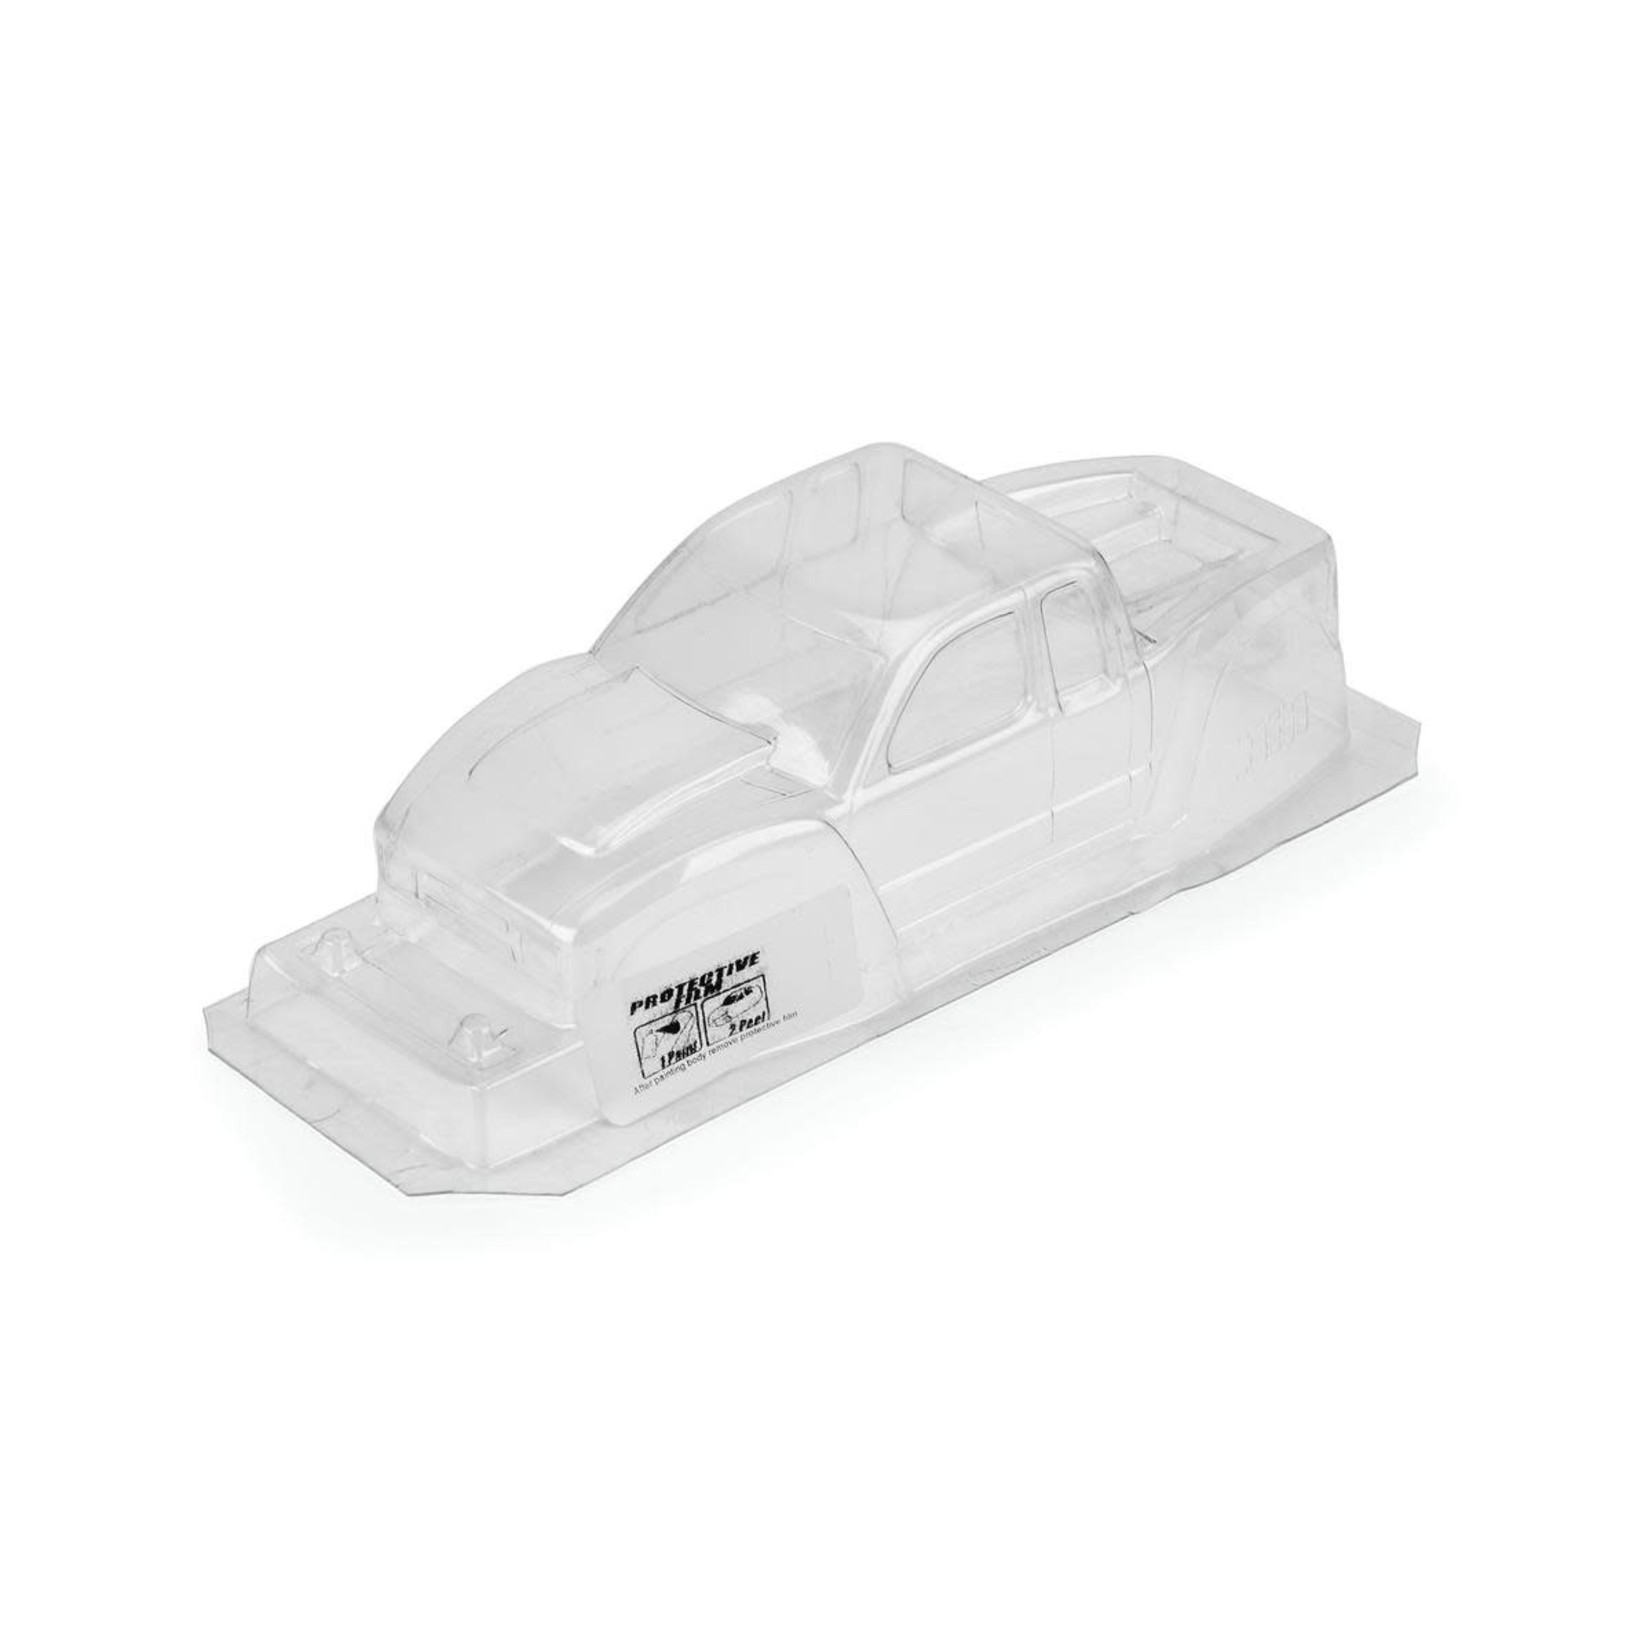 Pro-Line Pro-Line Axial SCX24 Cliffhanger High Performance Body (Clear) #3596-00